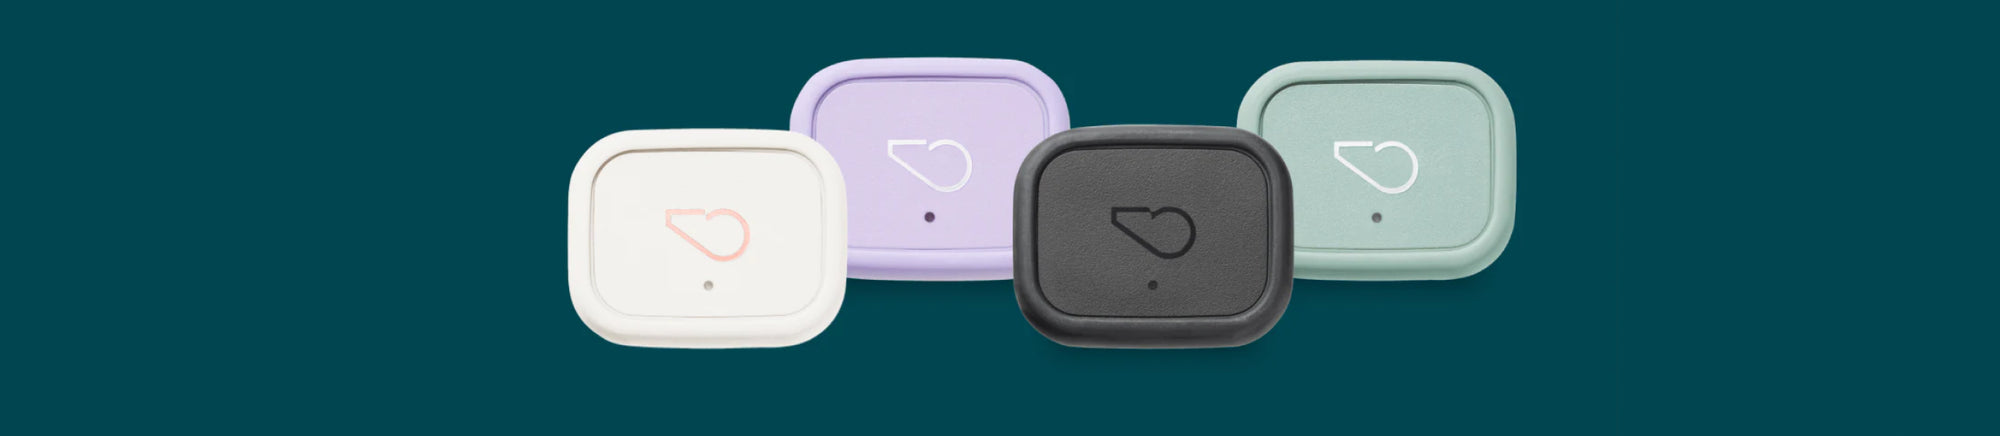 Whistle Health smart devices